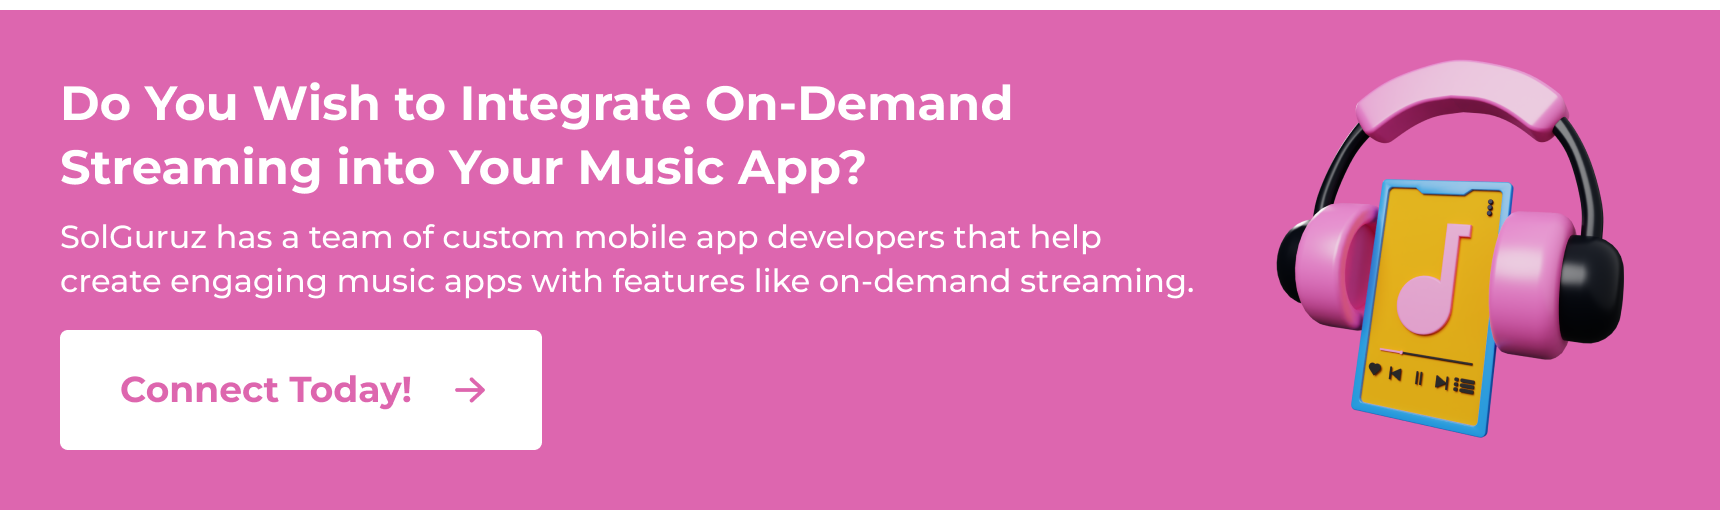 Do You Wish to Integrate On-Demand Streaming into Your Music App